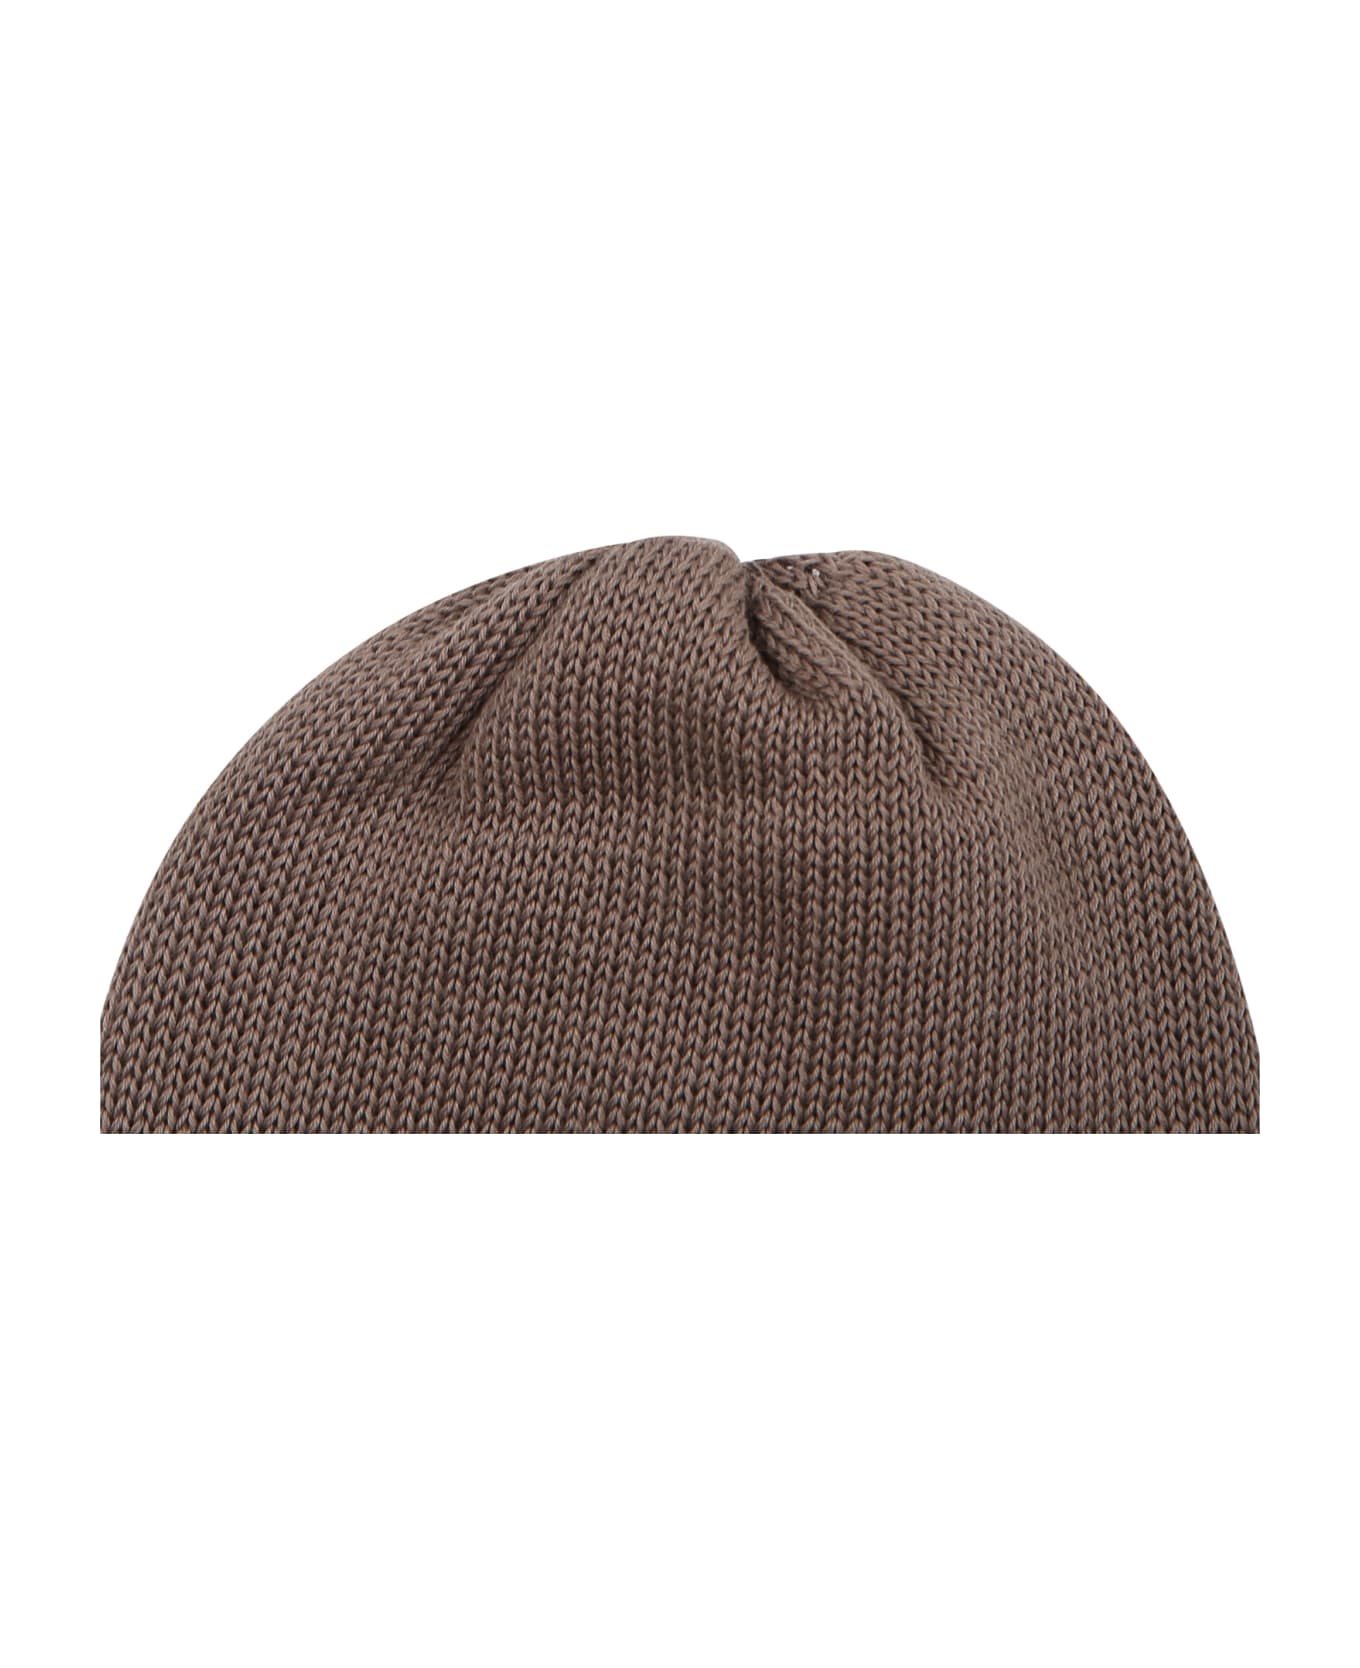 Little Bear Brown Hat For Baby Kids - Brown